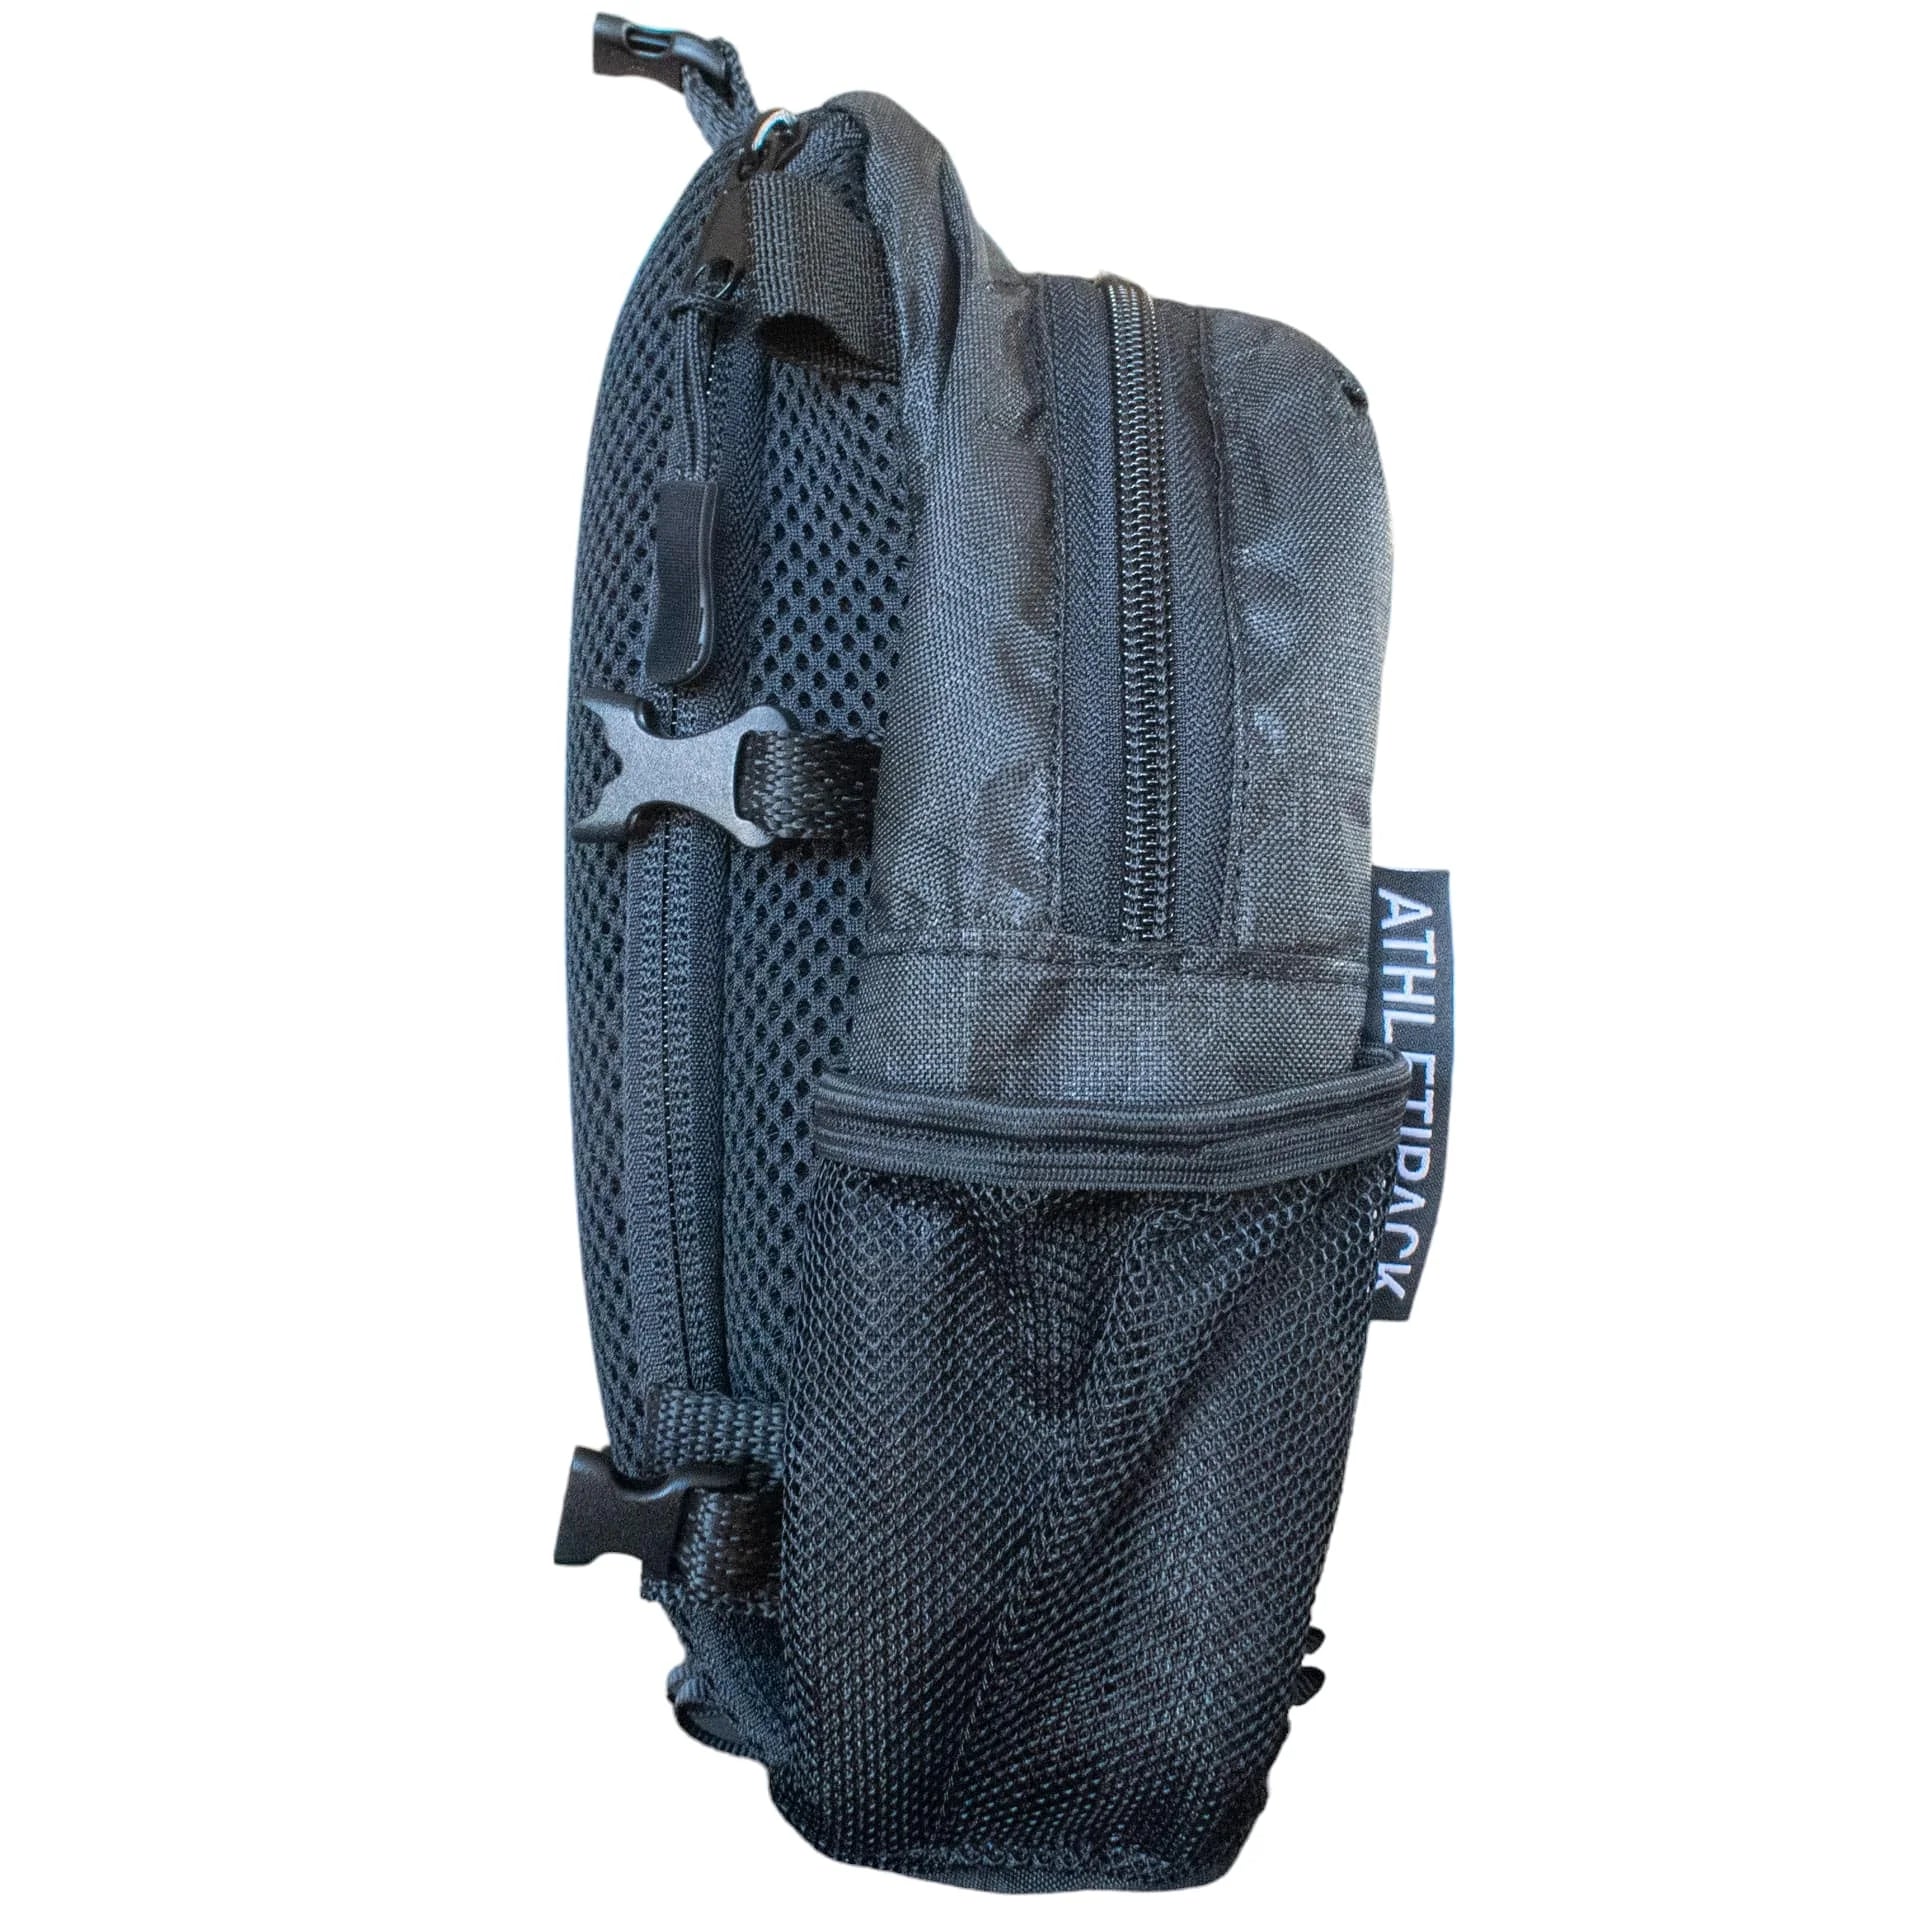 AthletiPack Tactical Large